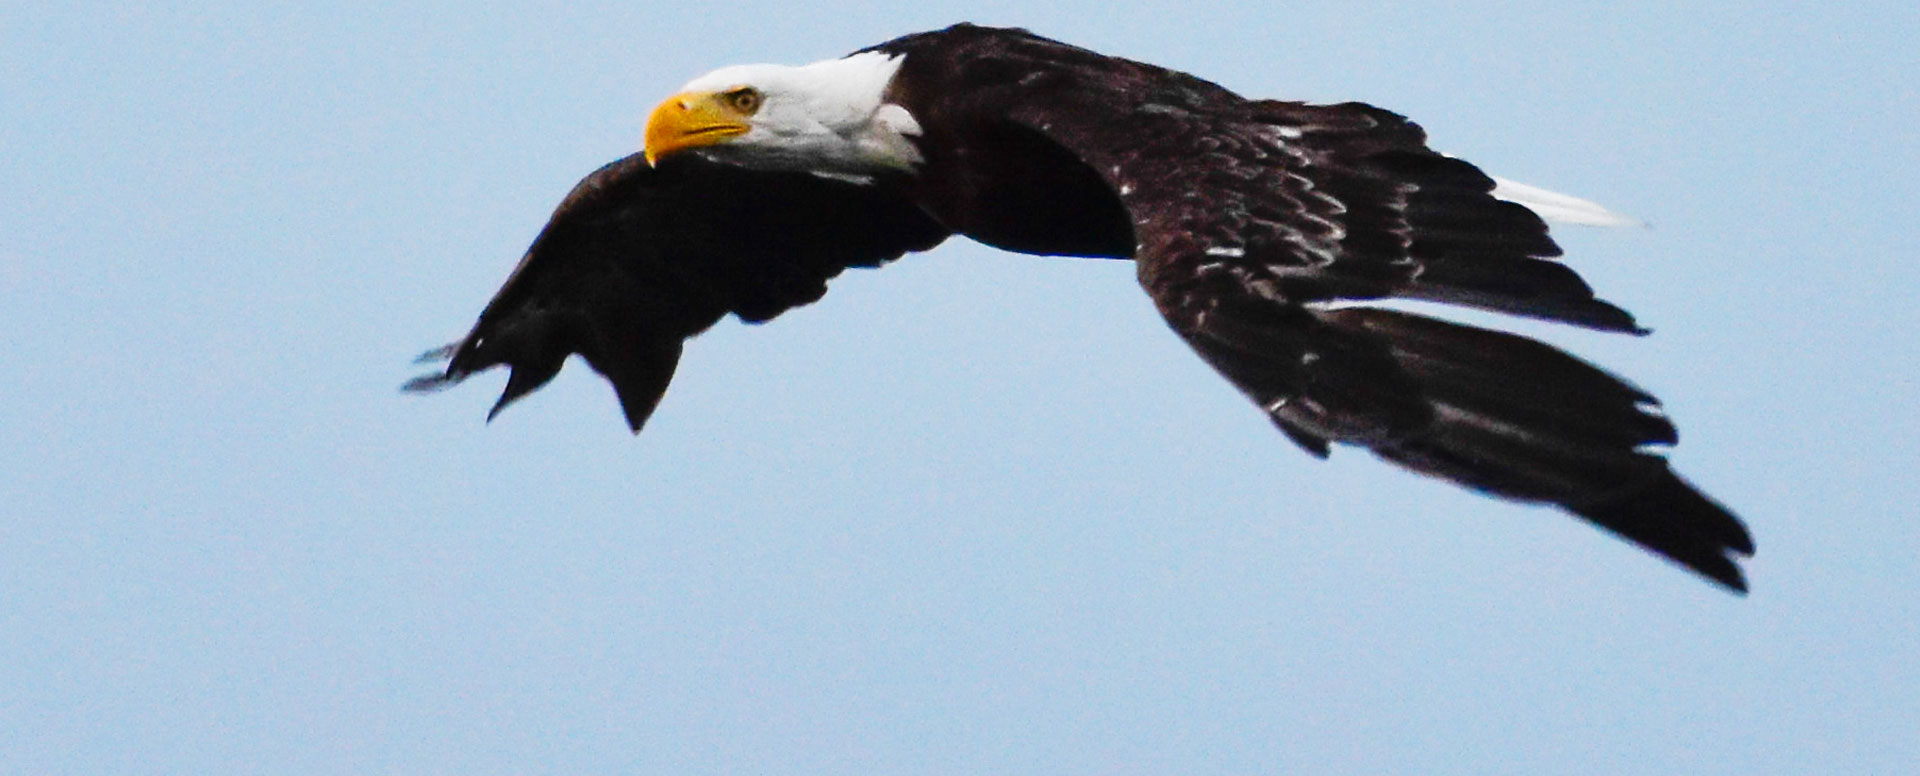 bald eagle on the travel insurance for your kayaking tour page